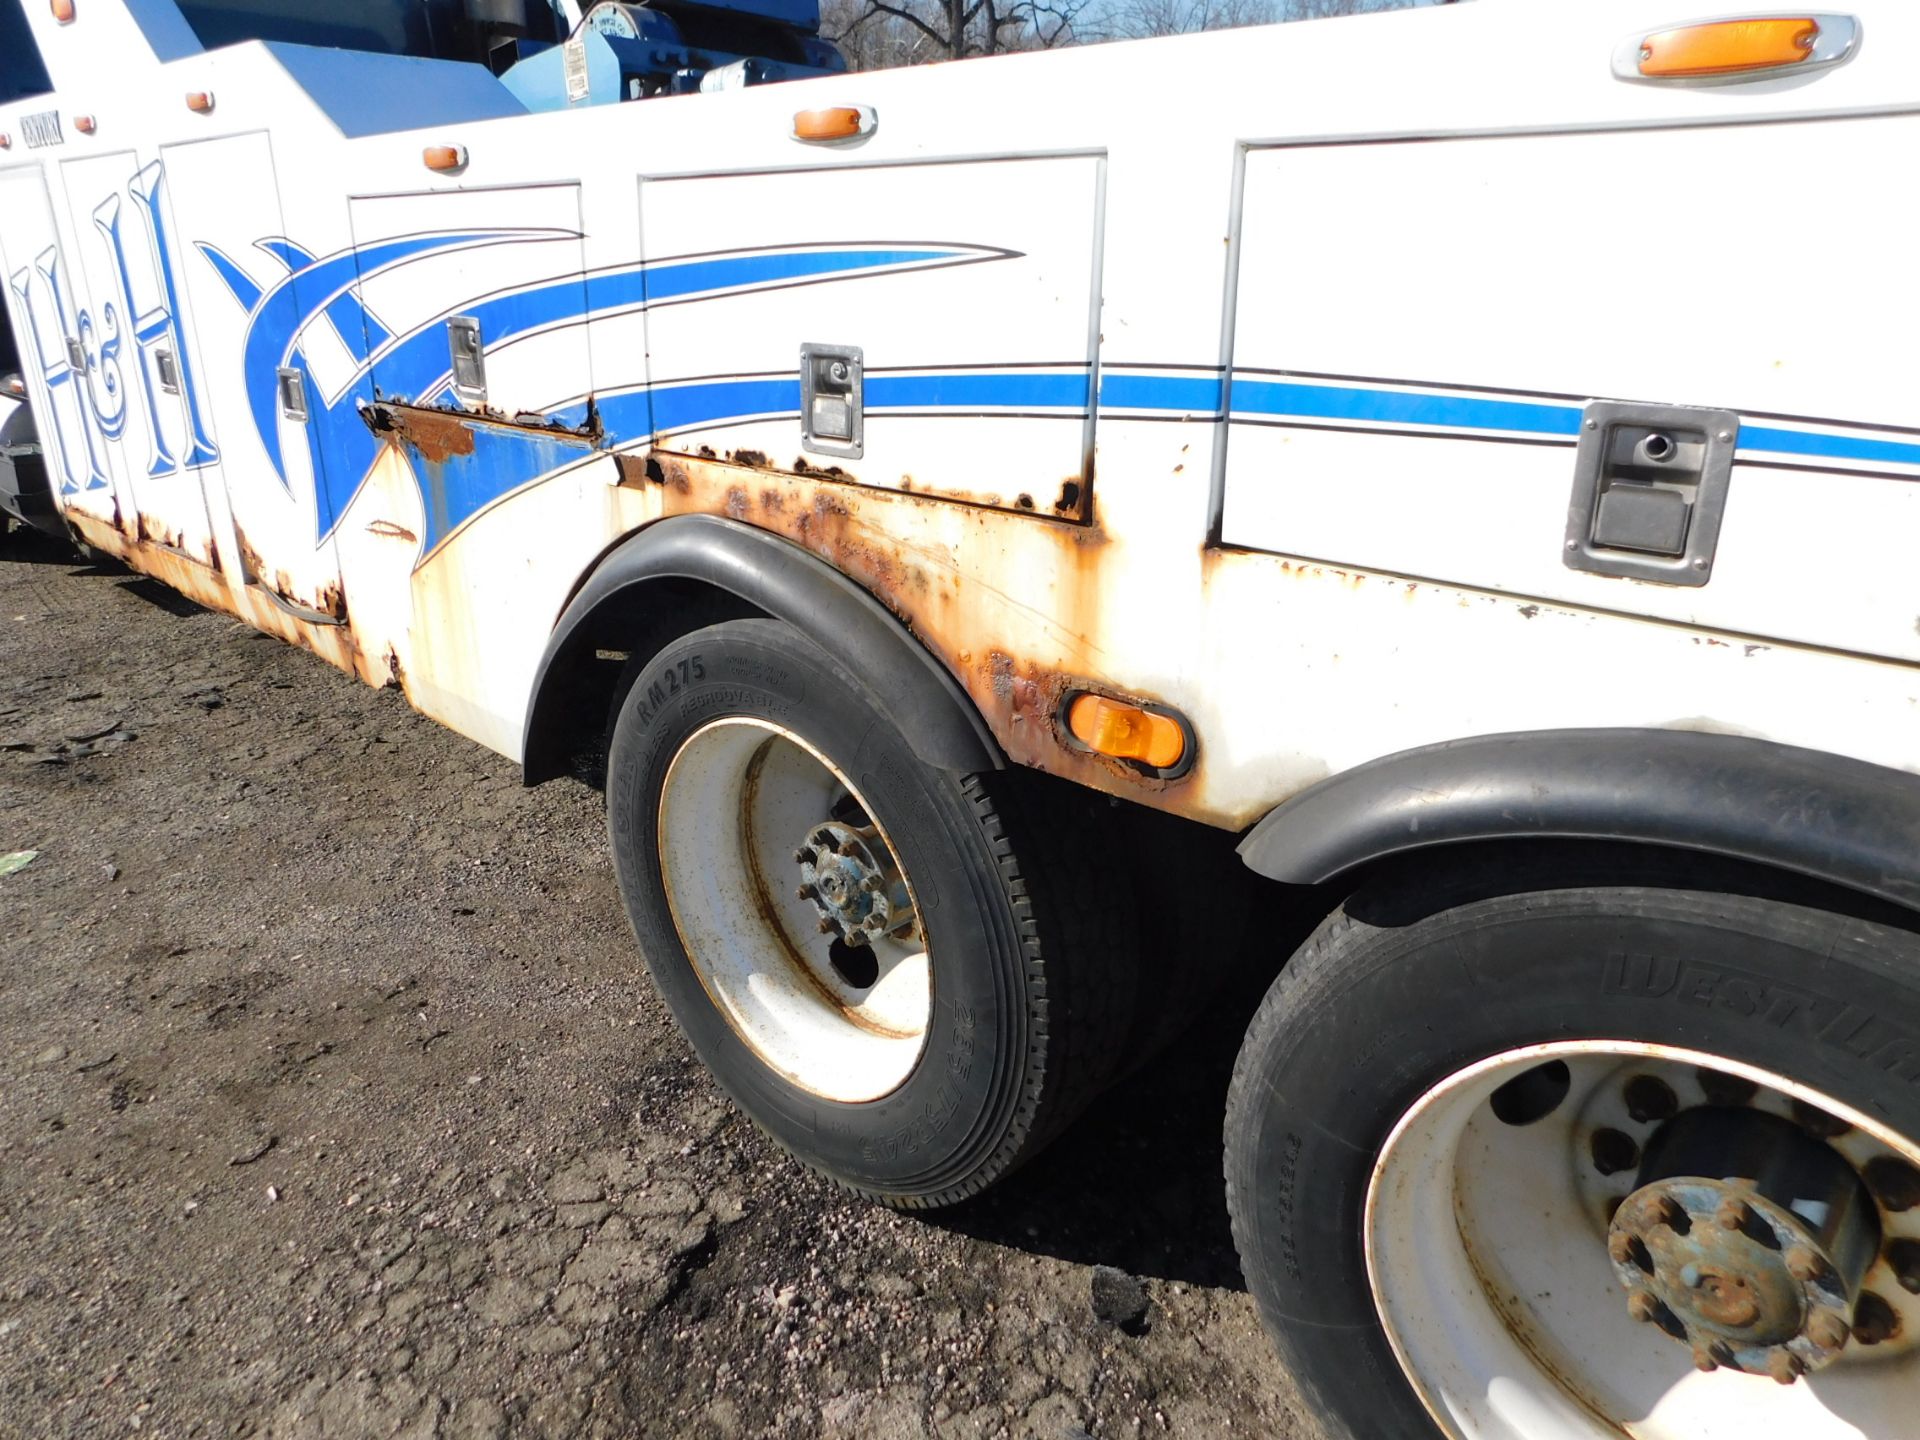 1989 WHITE Volvo GMC Aero Series 60 Heavy Duty Tow Truck, 329,000 miles showing on Odometer, Detroit - Image 11 of 28